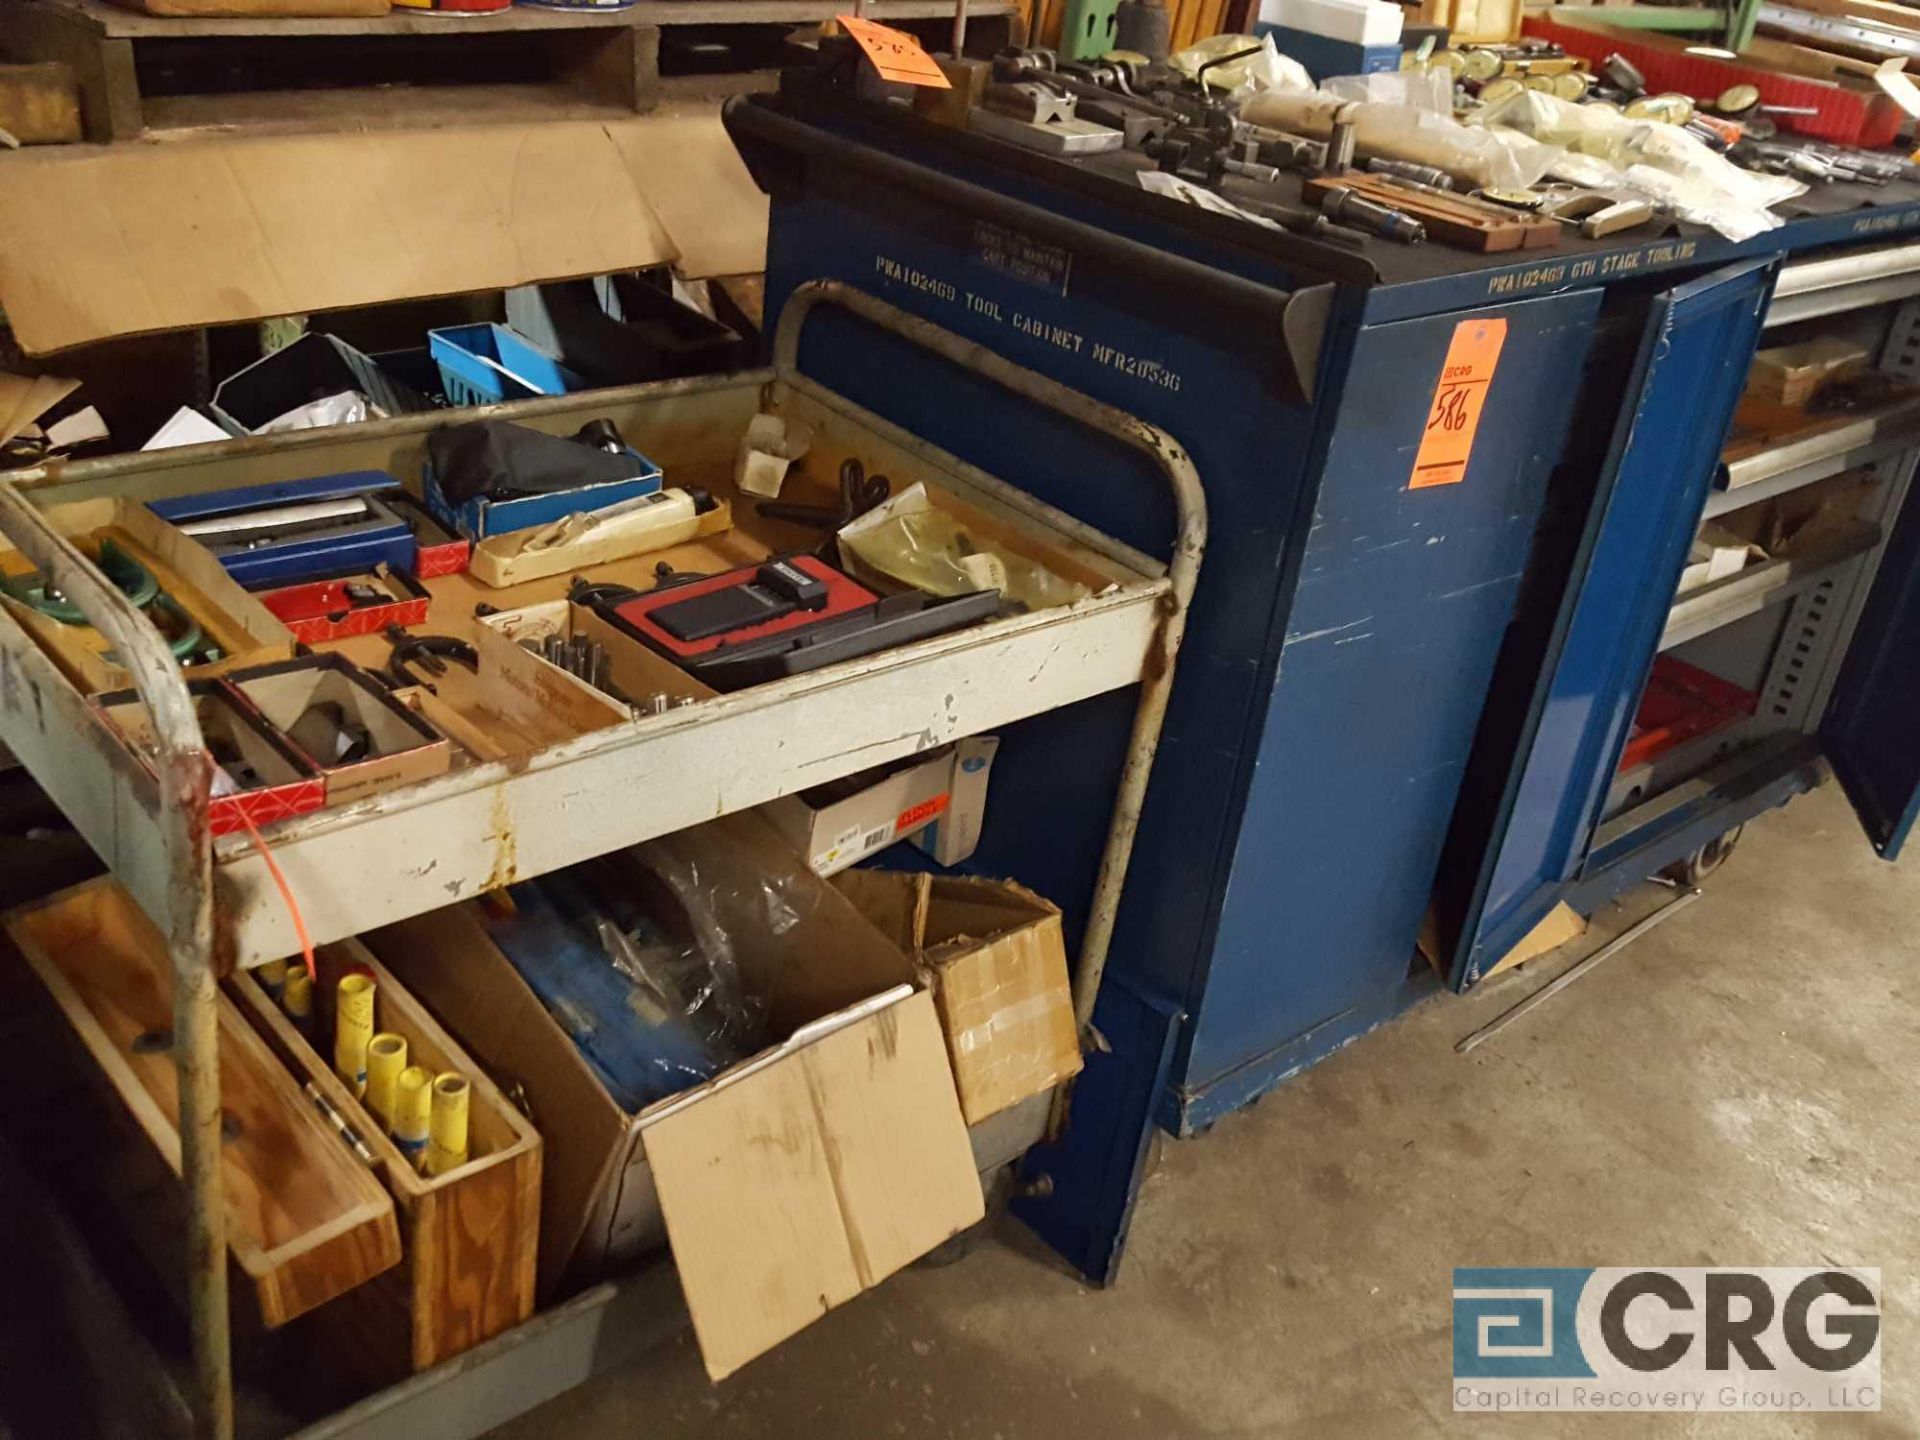 Lot of assorted machine shop tooling etc, including cutting tools, inspection tools, hold down tools